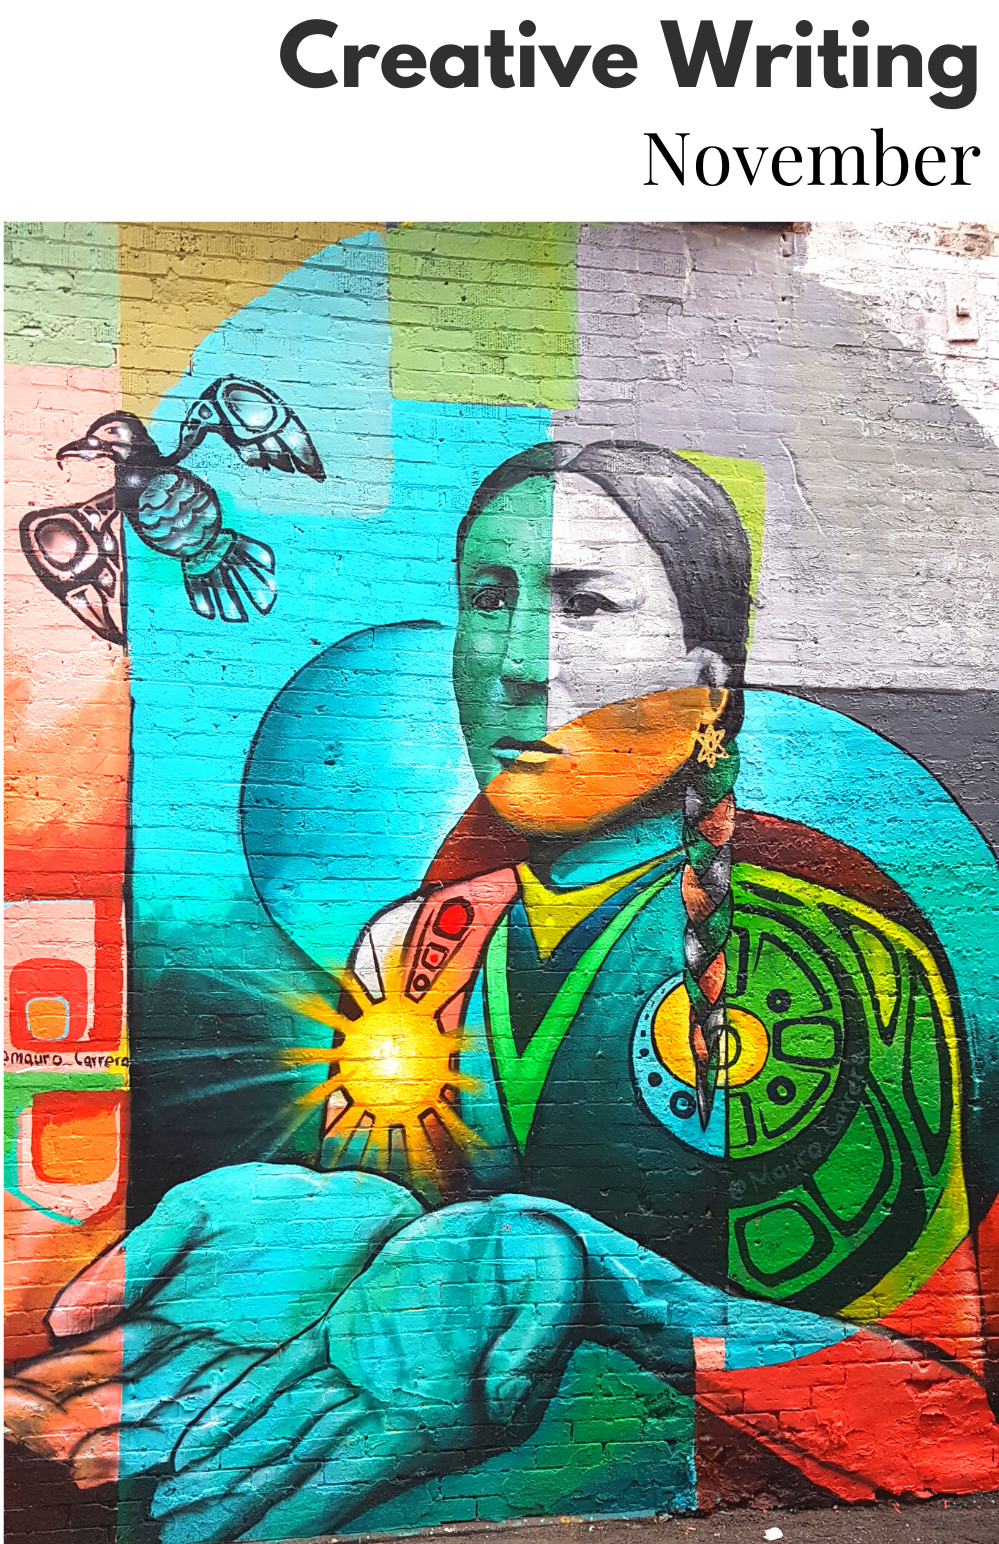 Image of a colorful mural featuring a Native American figure with their palms up. 